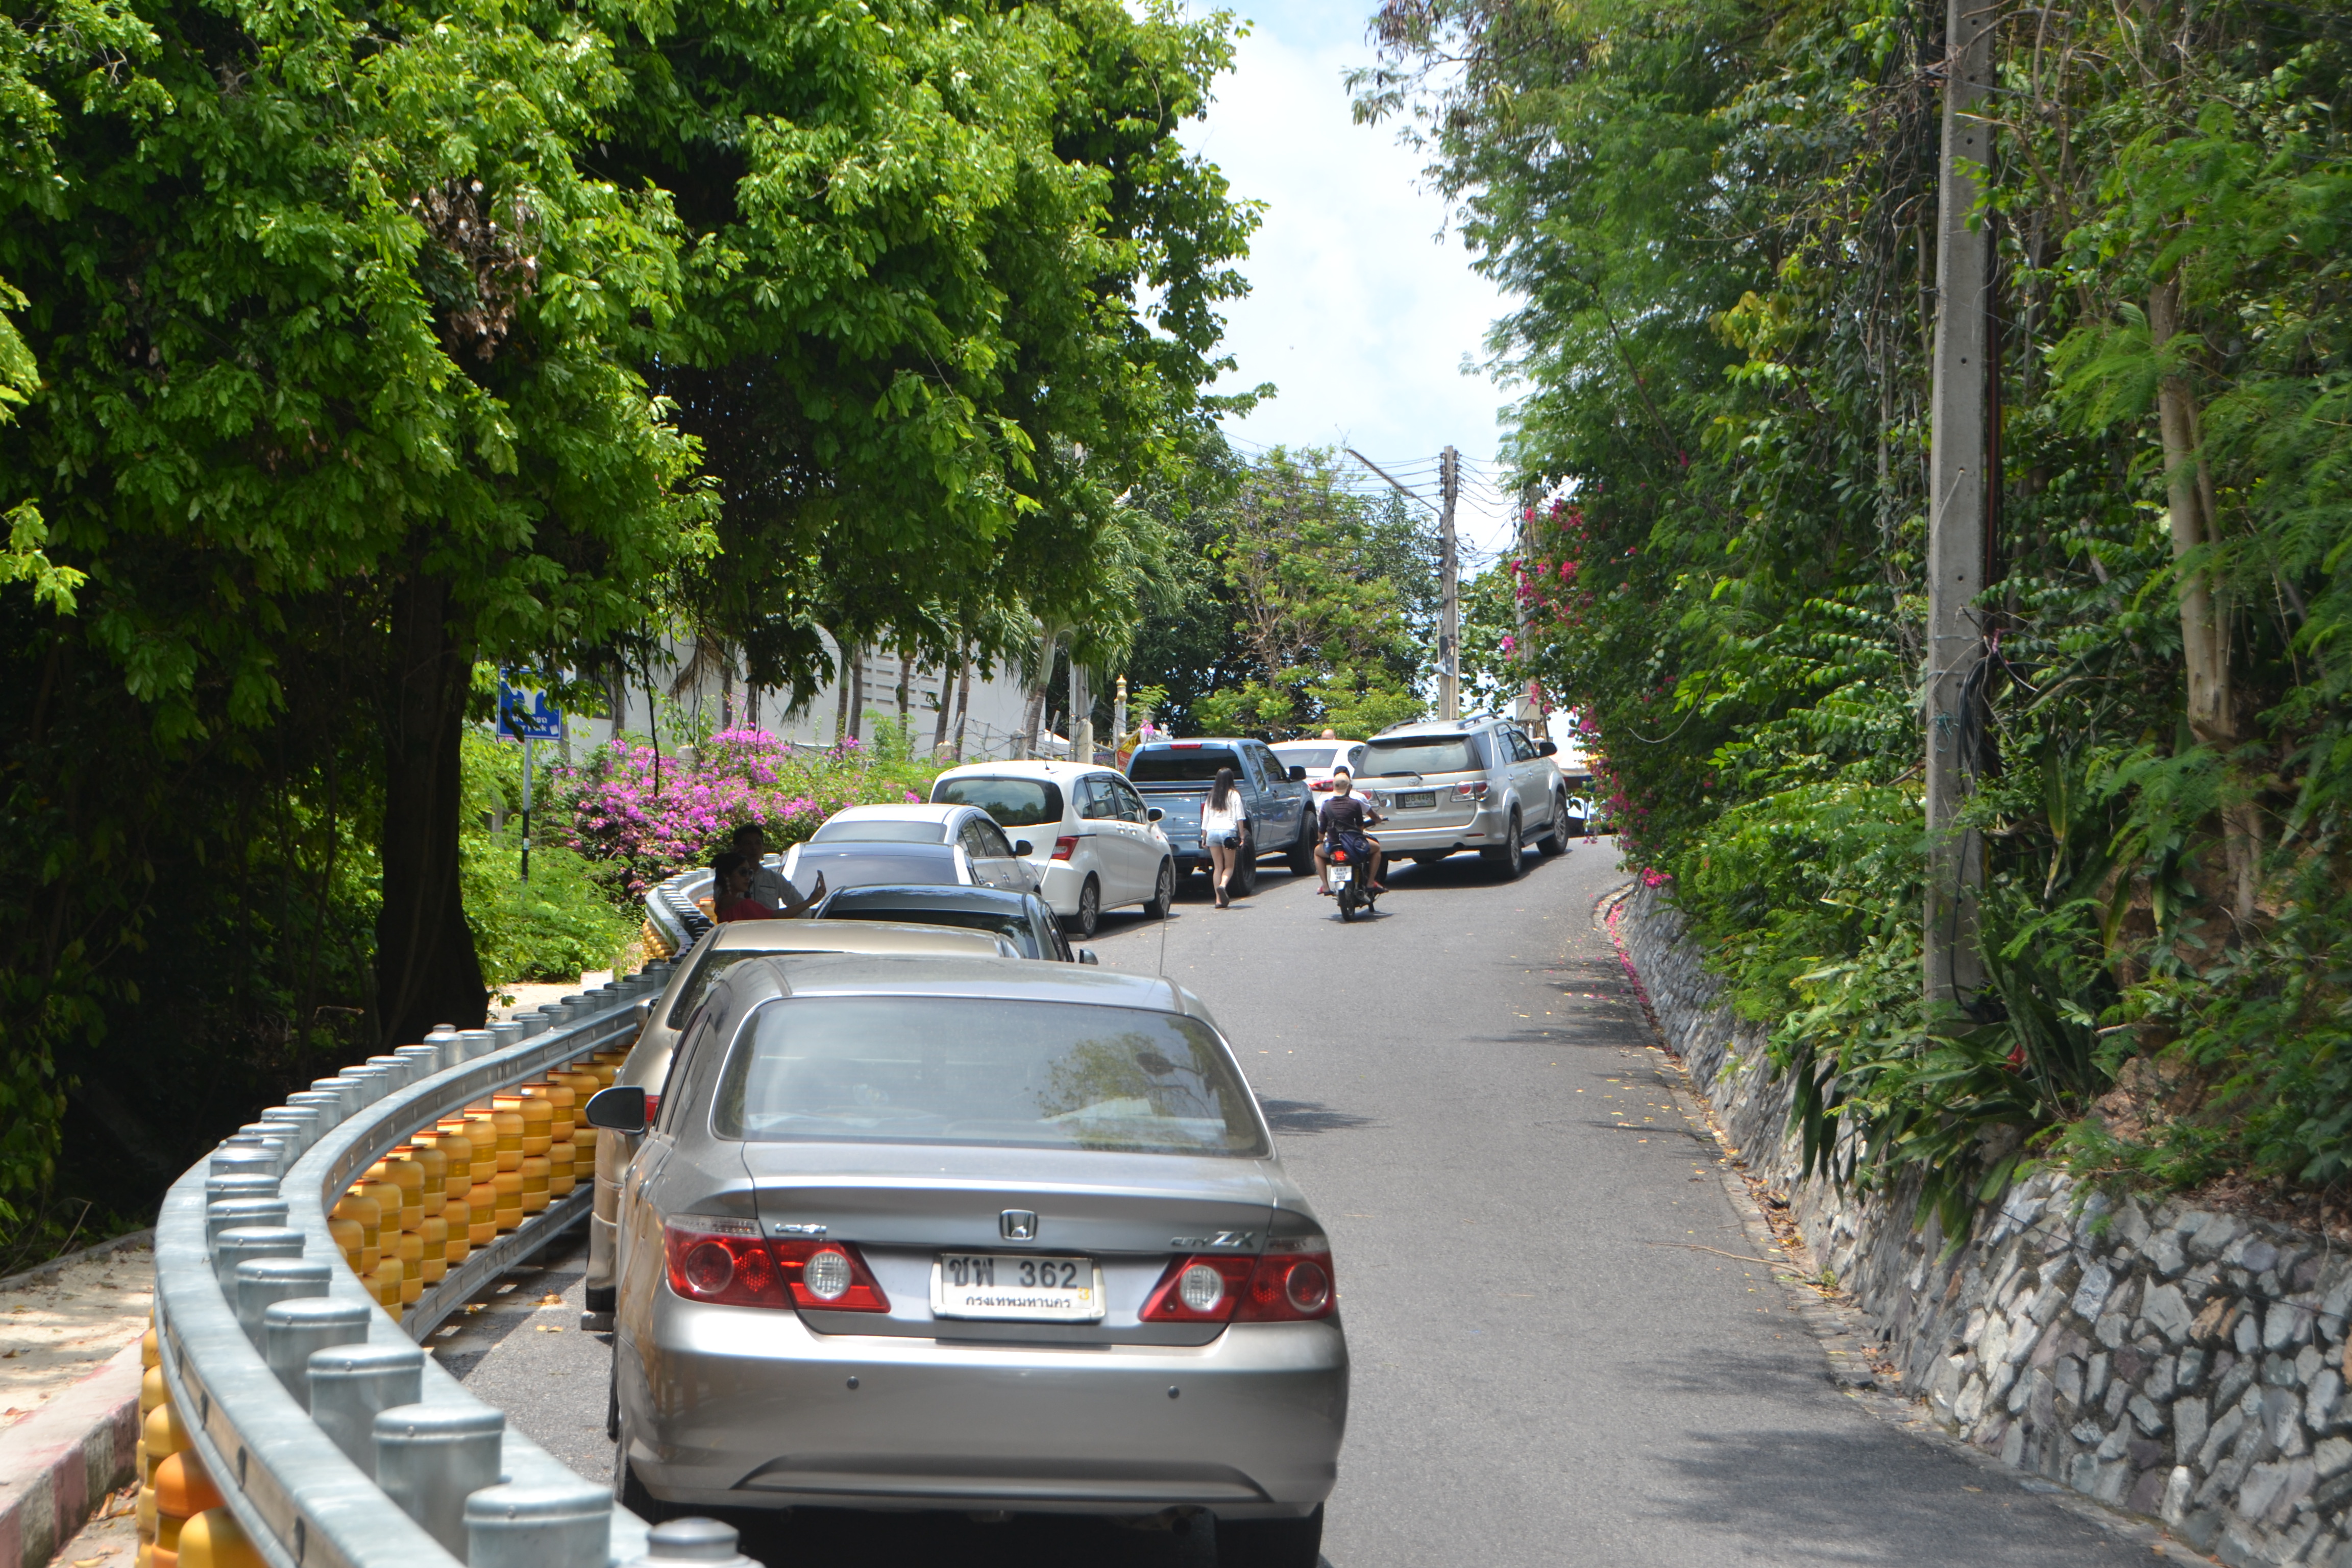 Pratamnak Hill, one of the most-popular tourist spots in the area, has parking space for just 20 vehicles. Hence the dangerous parking on the steep hill.